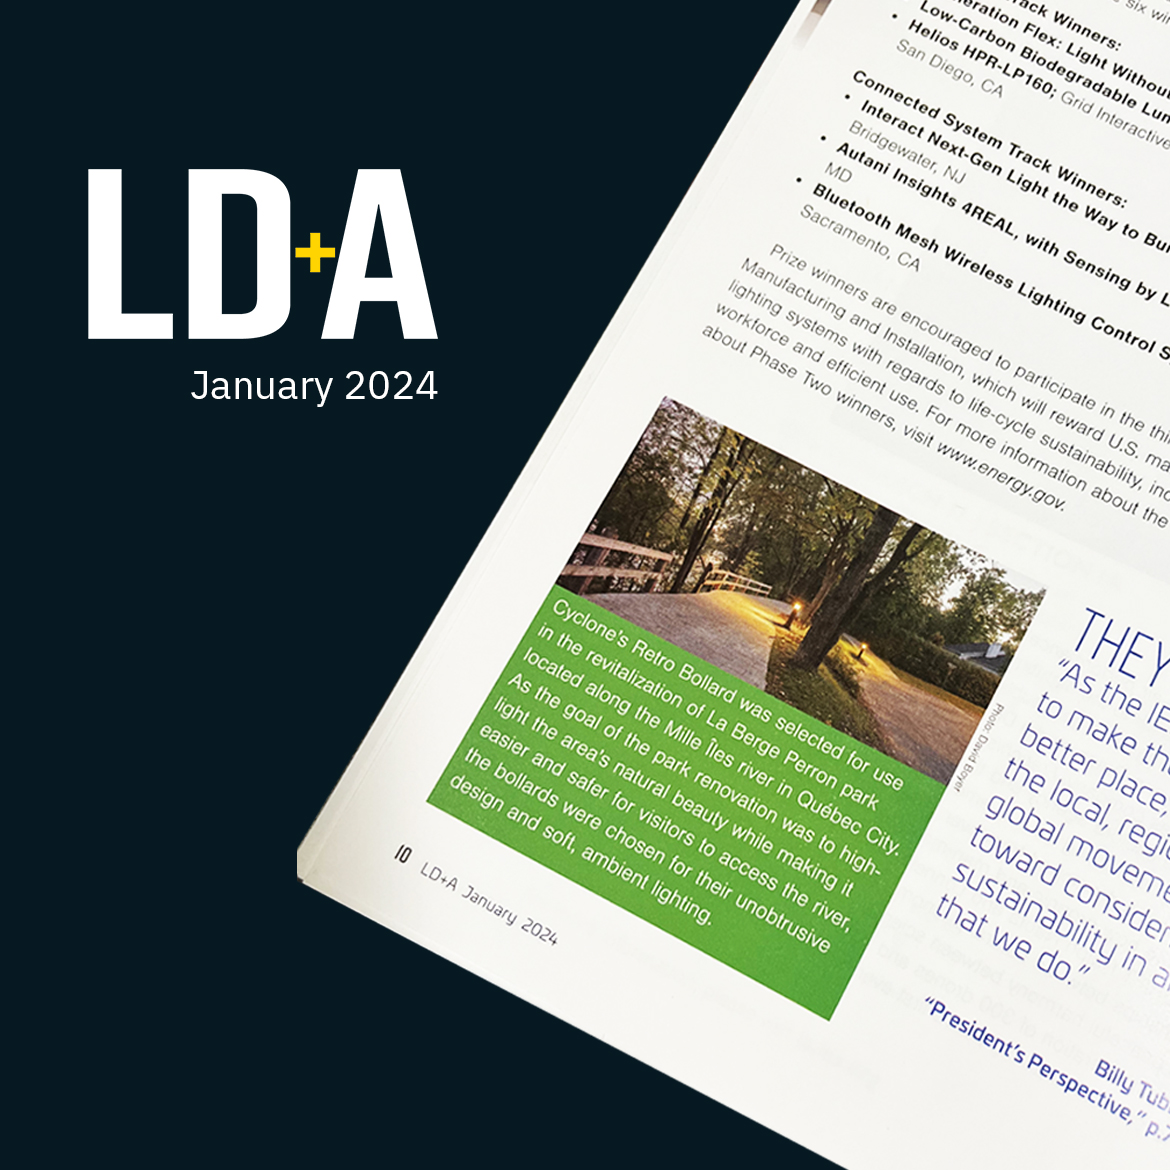 [ MEDIA MENTION ]
We were thrilled to see our project story about the revitalization of La Berge Perron park (Bois-des-Filions, Quebec) in the January issue of LD+A magazine. 

@The_IES
#outdoorlighting #parklighting #pathwaylighting #lightinginspiration #livablecities